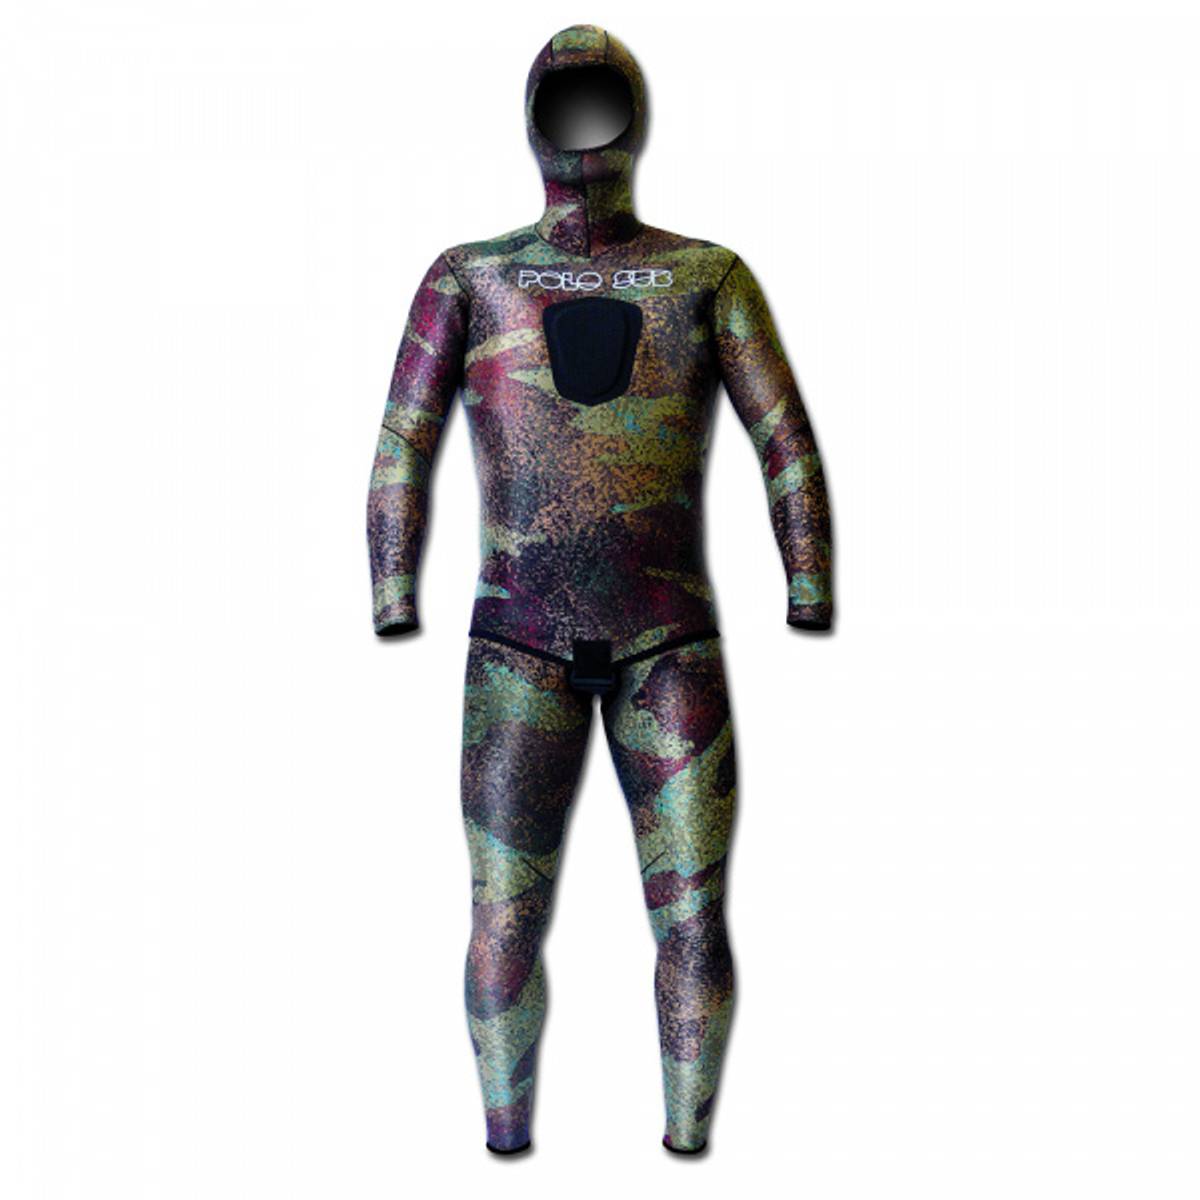 PoloSub Lined 7mm N17 camo wetsuit